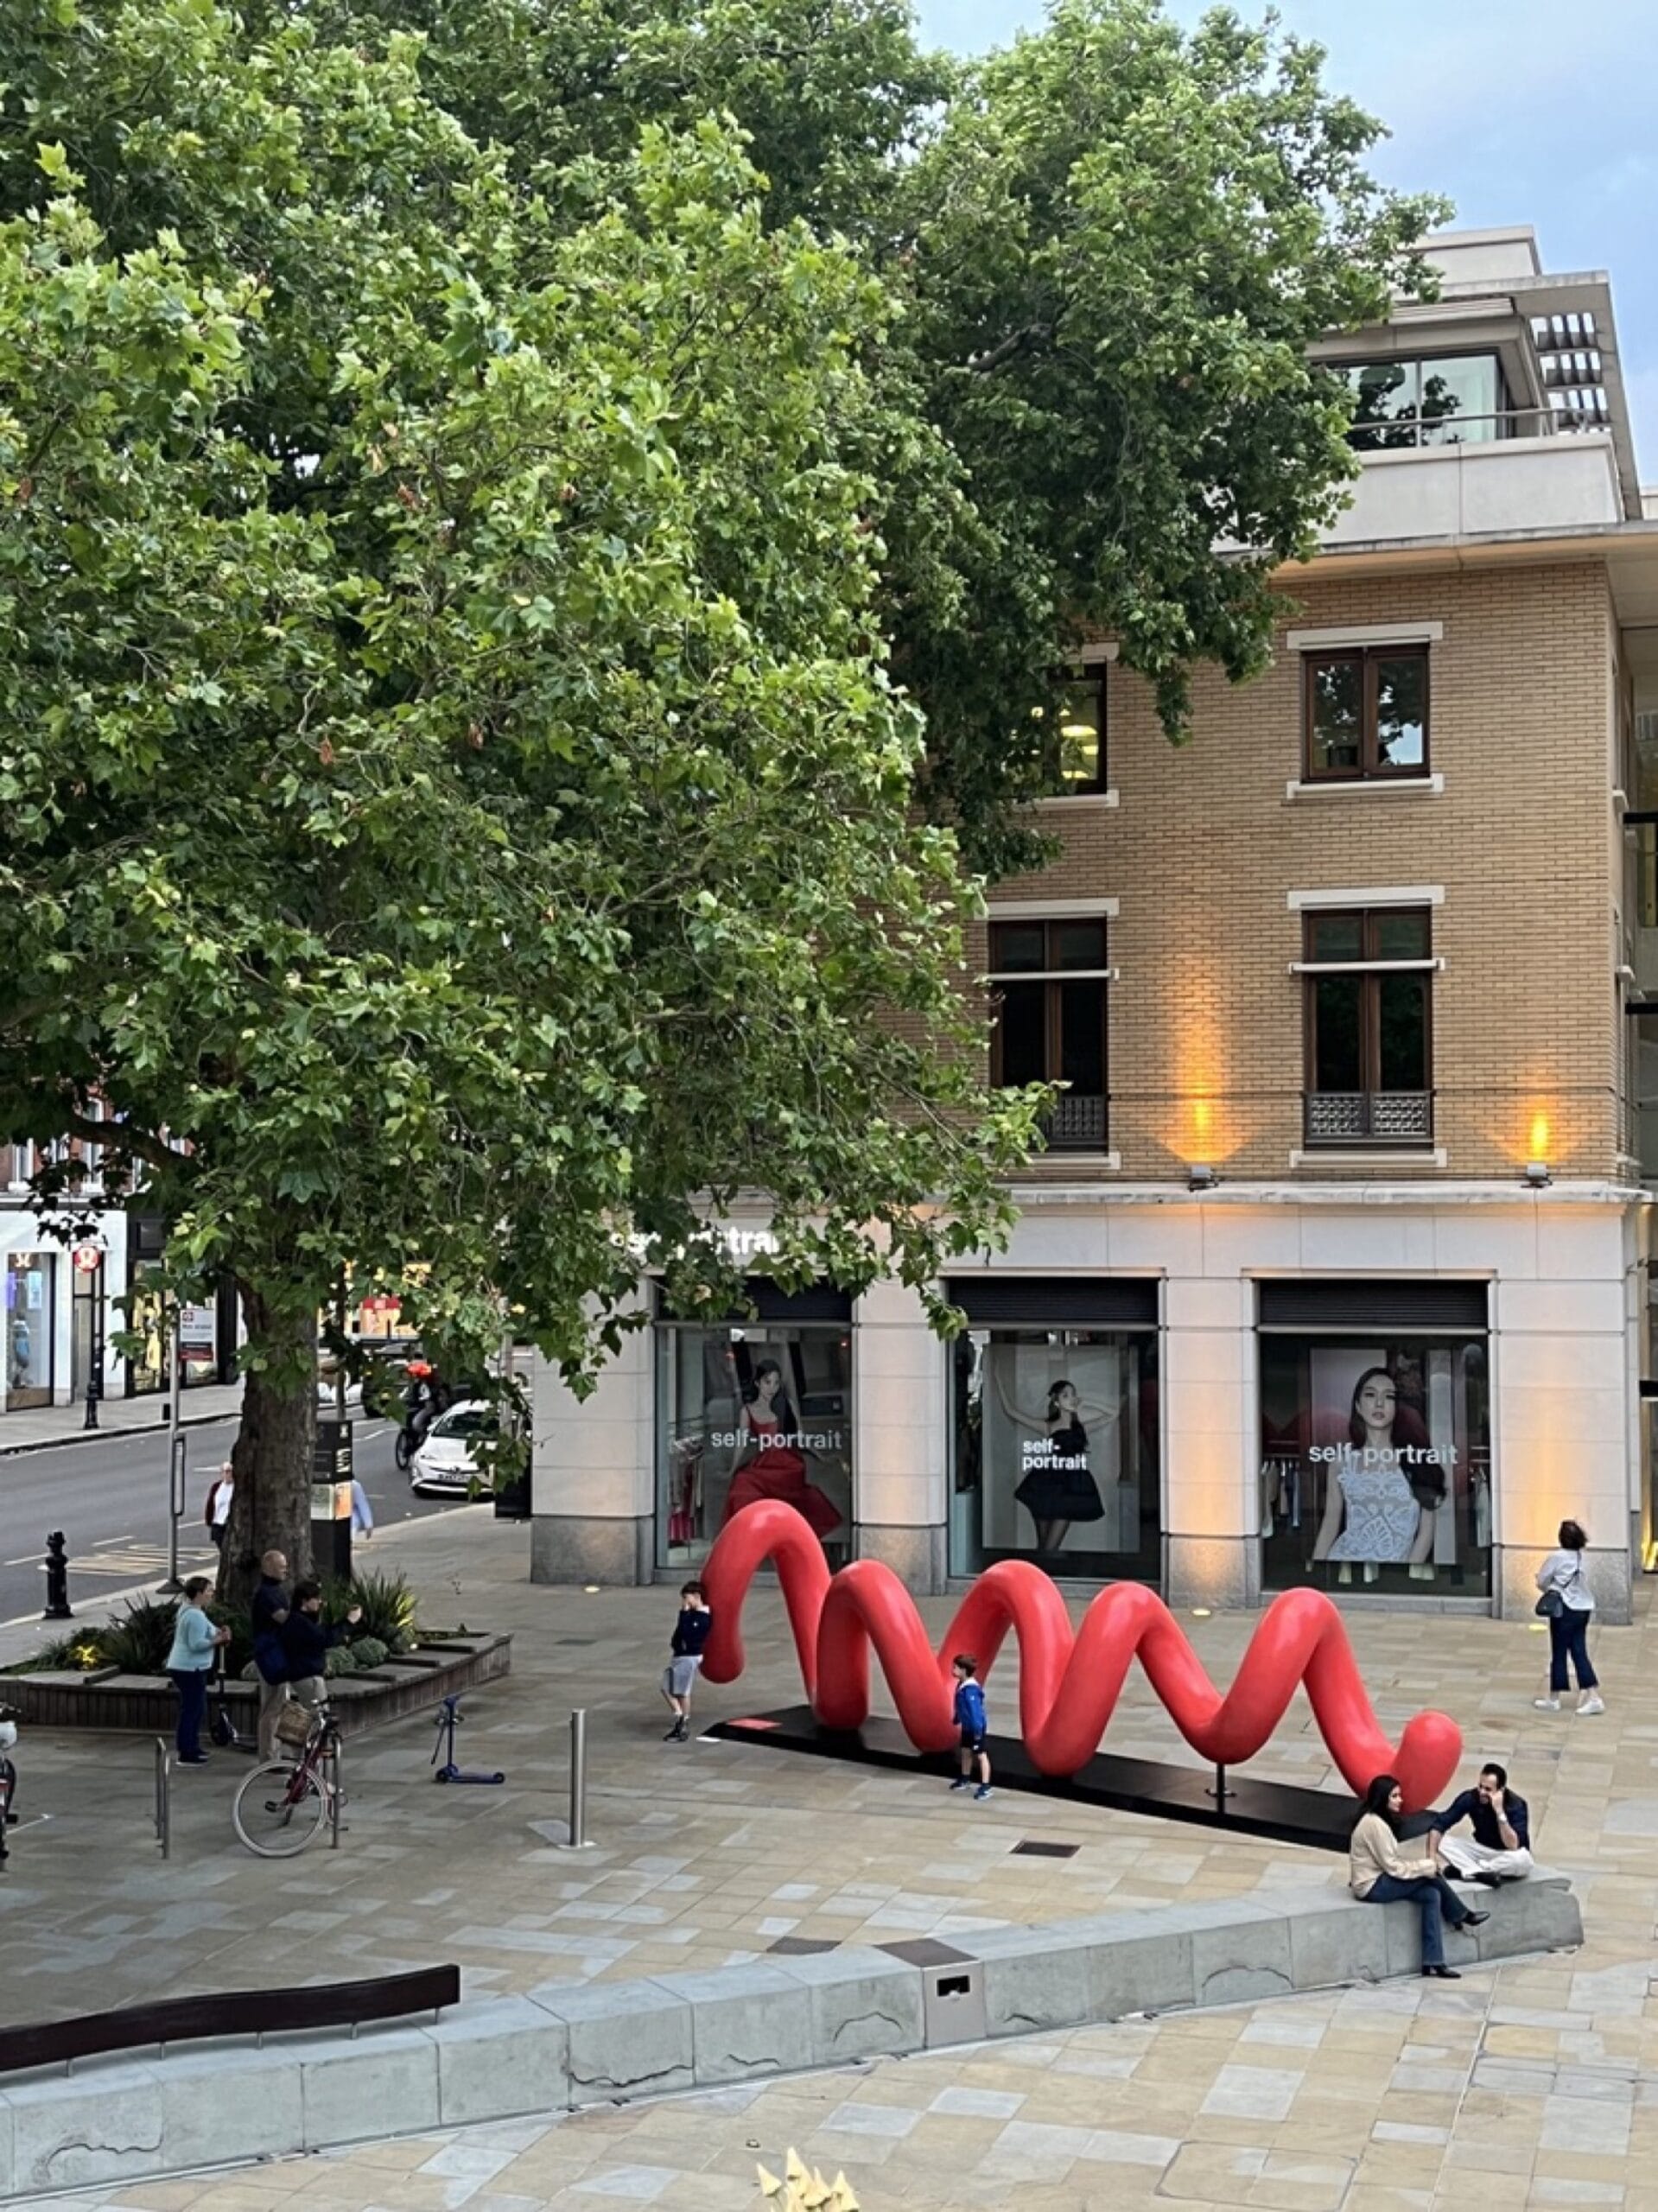 a large-scale, red public sculpture of curving lines that spell the word "love" when viewed from the right perspective, shown in this image from a high vantage point in London's Duke of York square